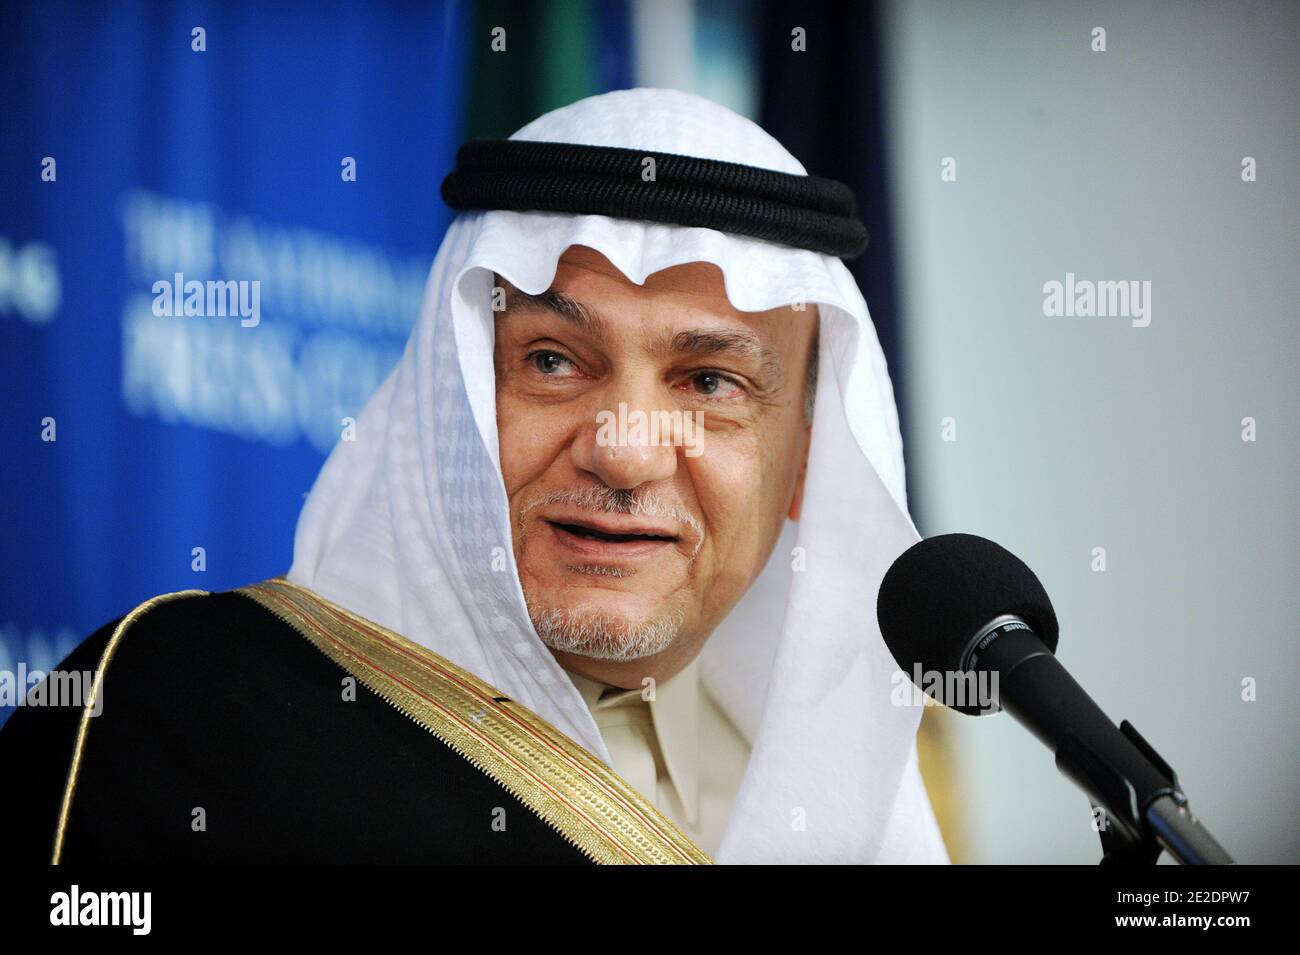 Prince Turki Al Faisal of Saudi Arabia speaks at the National Press Club November 15, 2011 in Washington, DC. Prince Turki Al Faisal spoke about the alleged Iranian plot to assassinate the Saudi Arabian ambassador to the United States, the evolving role and rights of women in Saudi Arabia, and Saudi Arabia's support for Palestinian UN membership and statehood recognition.Photo by Olivier Douliery/ABACAPRESS.COM Stock Photo